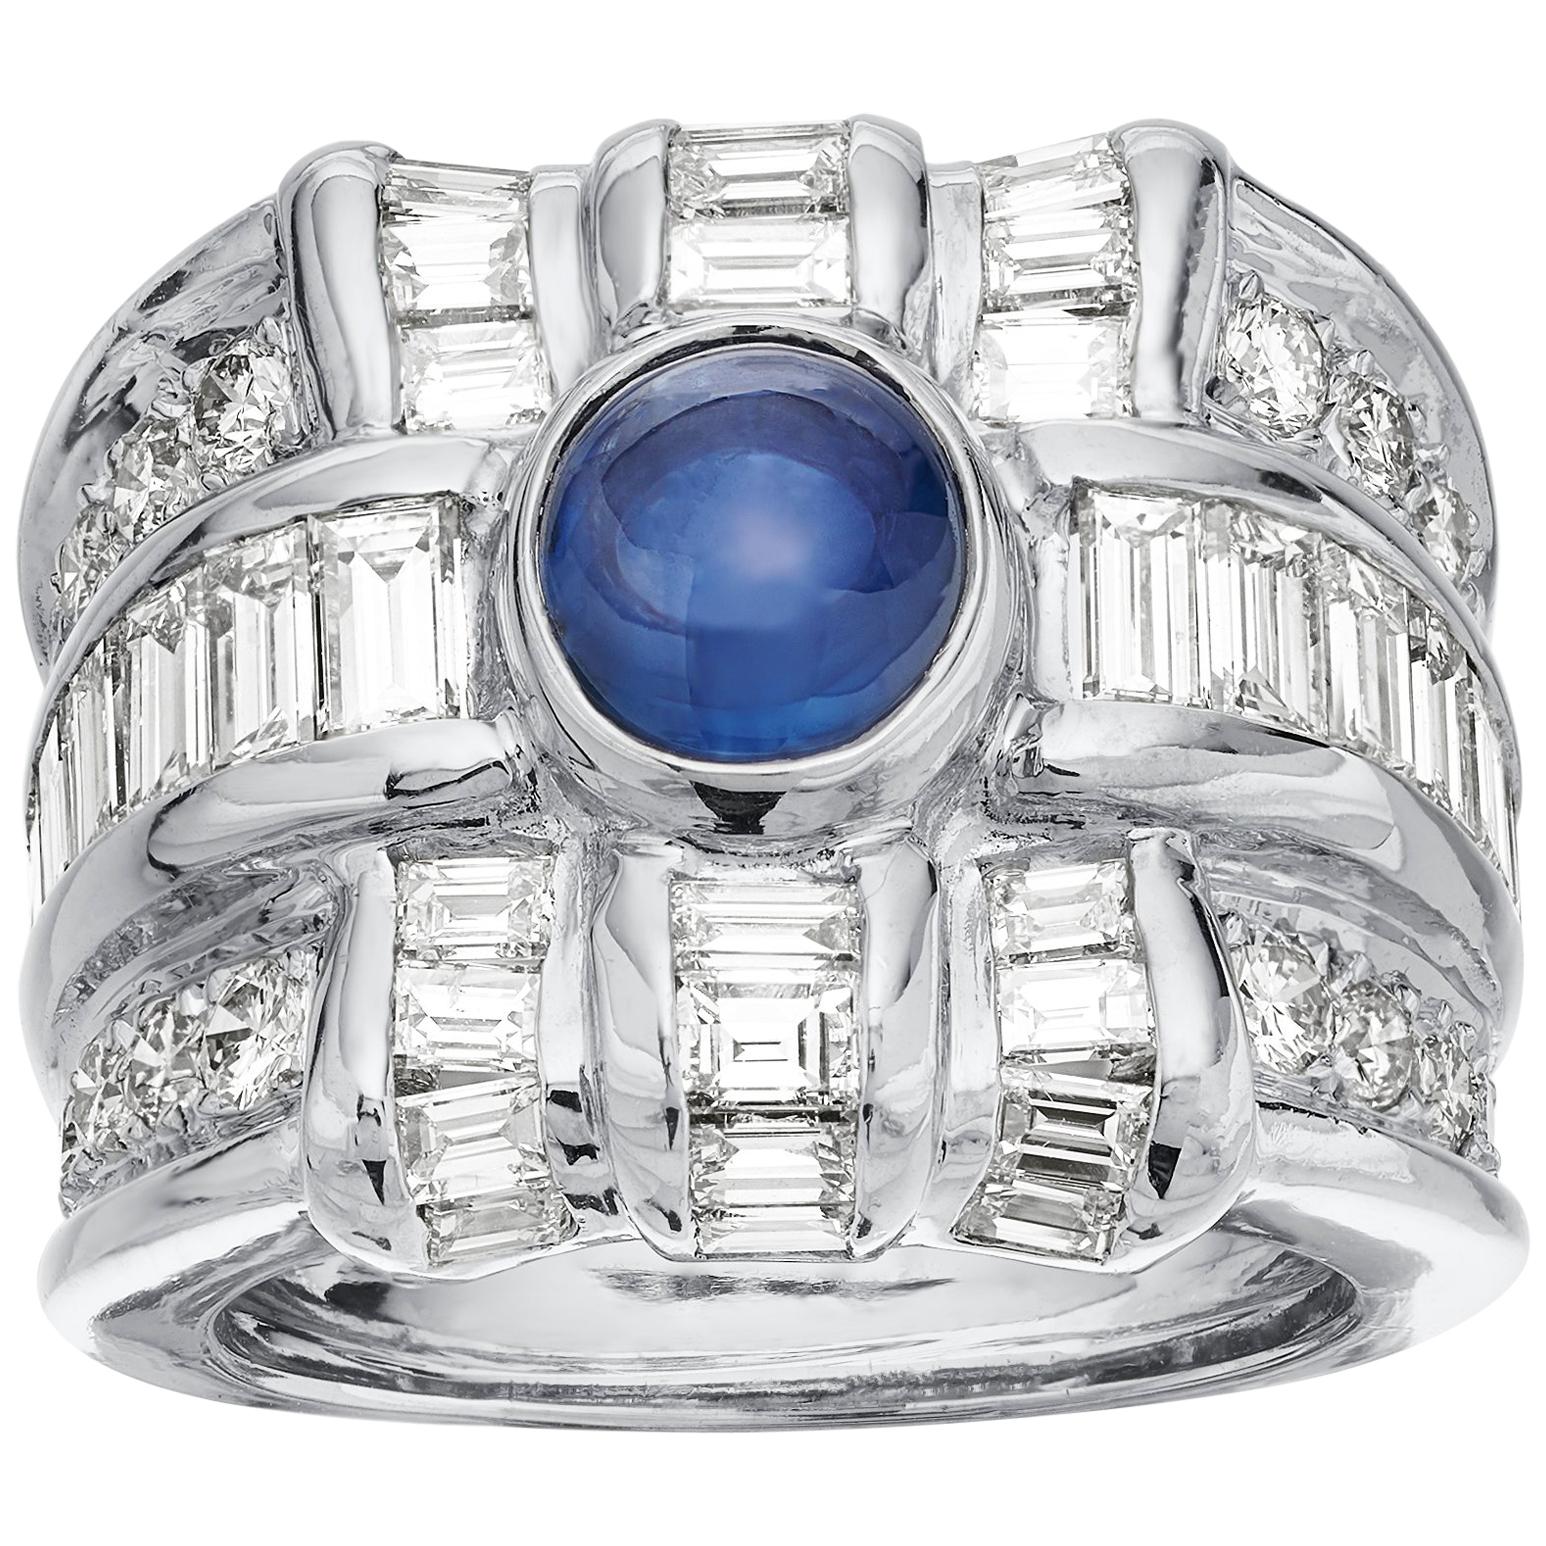 Diamond & Sapphire 18K White Gold Ring - A Dramatic Statement Piece For Sale